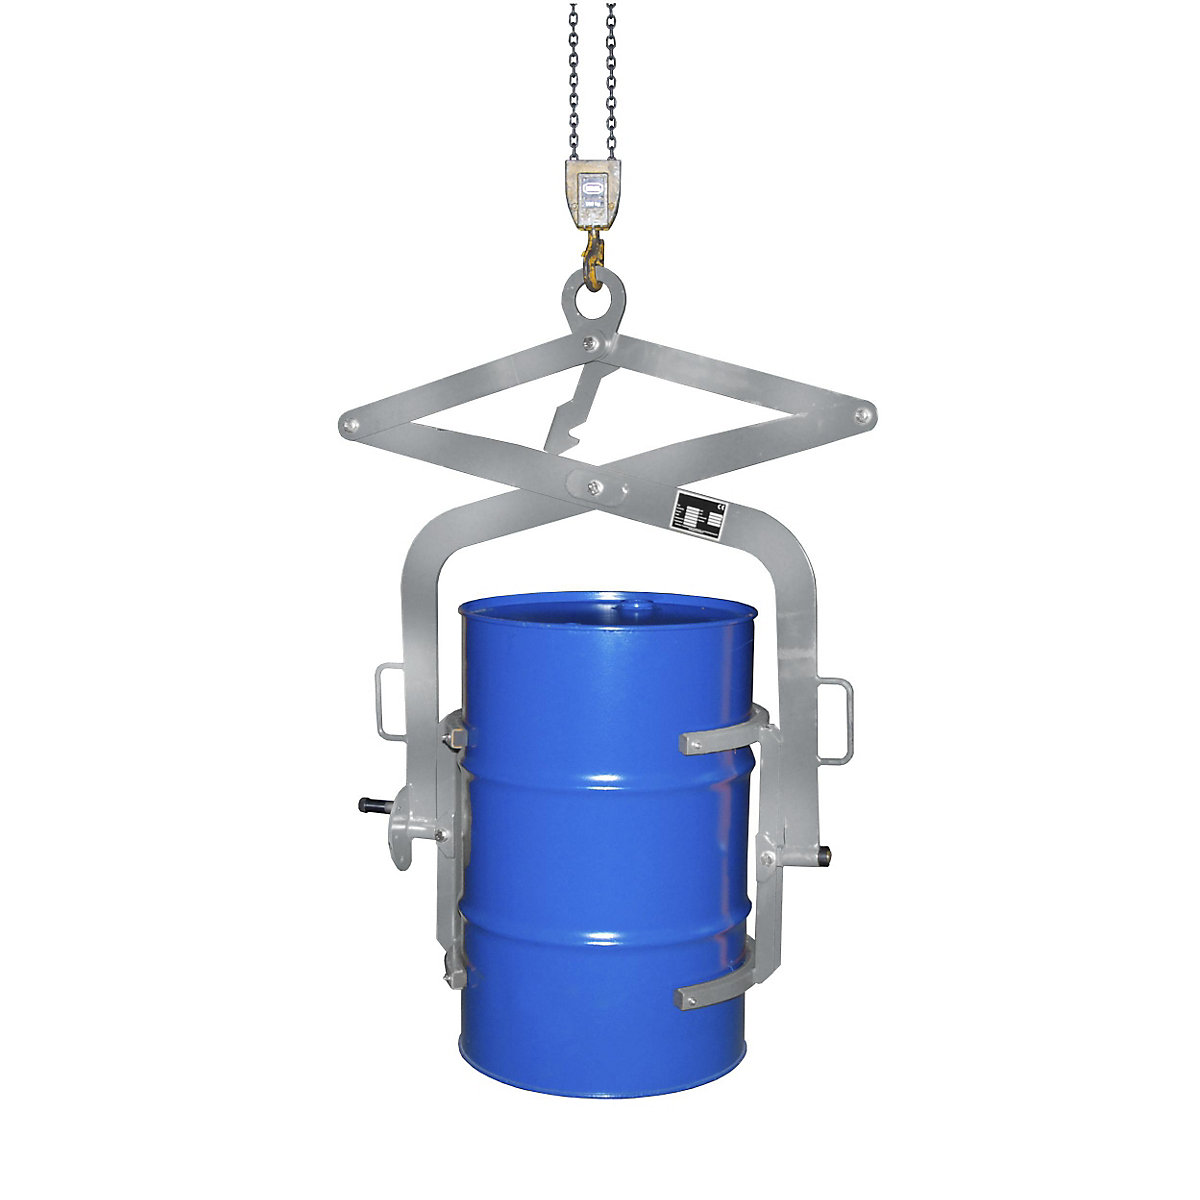 Drum tilting clamp – eurokraft pro, for 200 l steel bung drums and drums with lids, galvanised-2